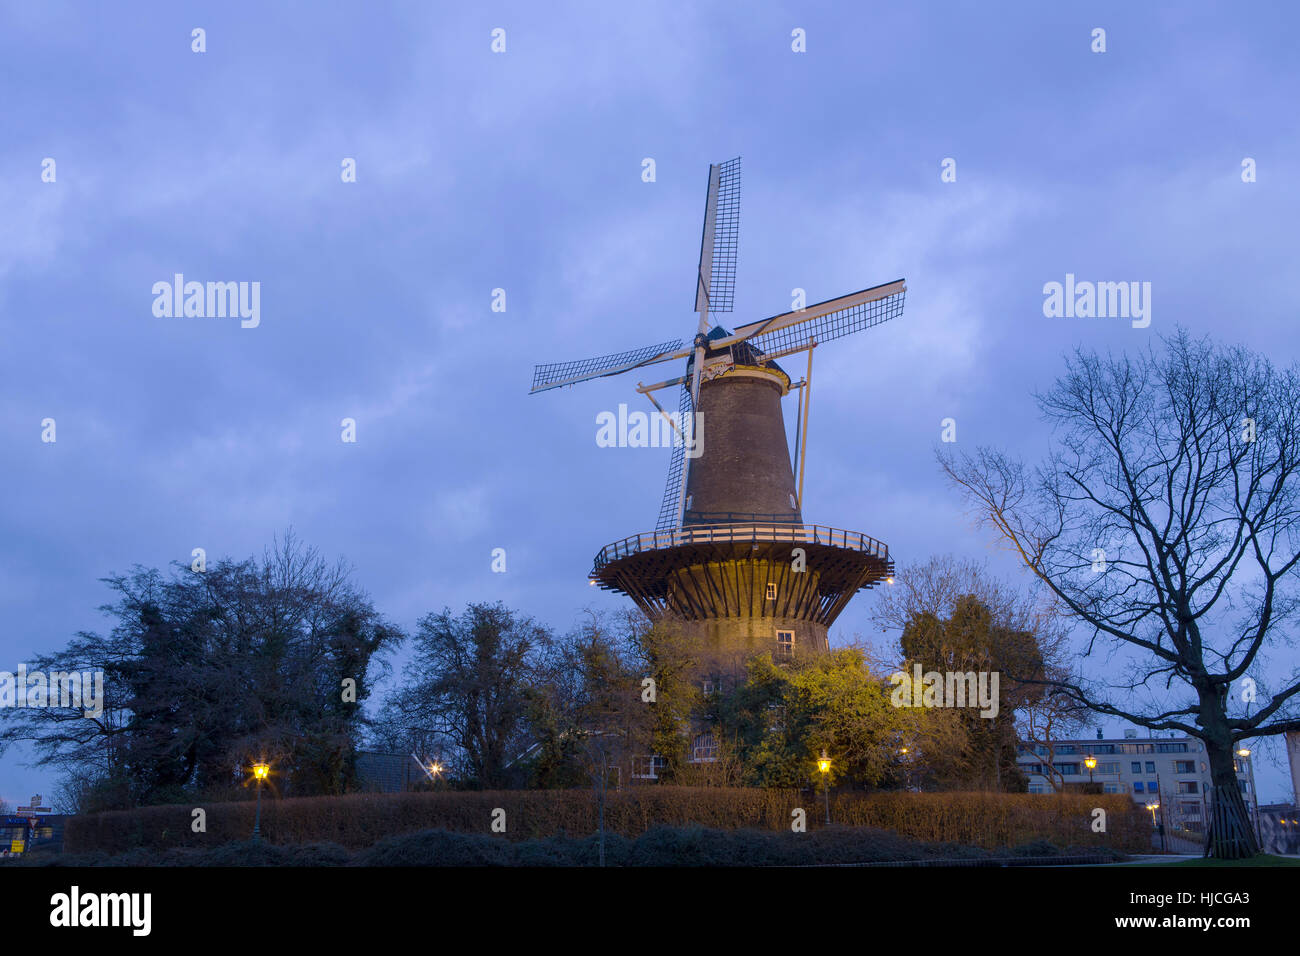 Iconic dutch Windmill in the University town of Leiden in the Netherlands. Stock Photo